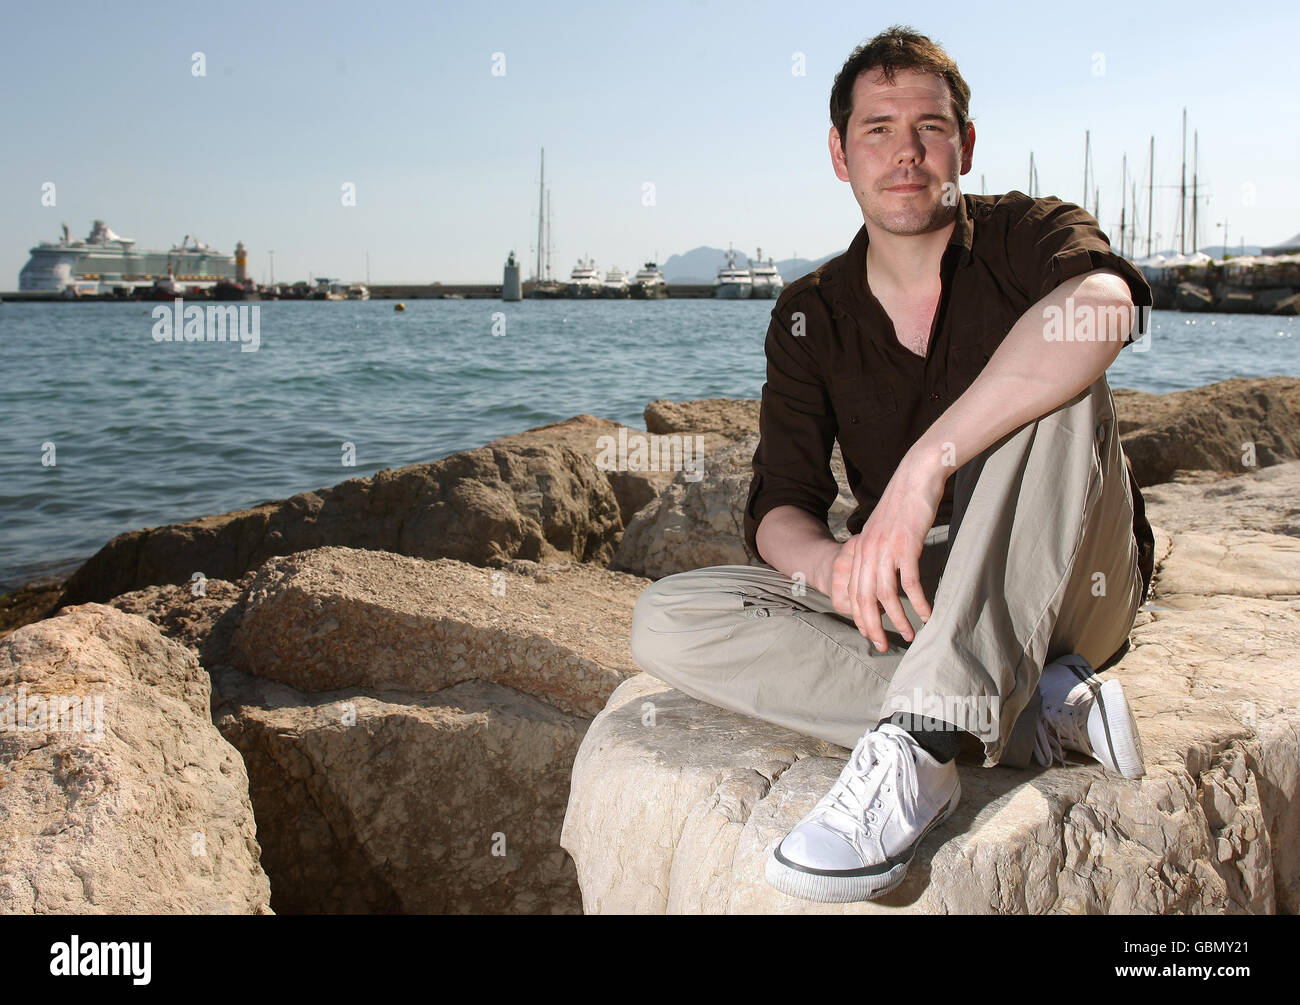 Film maker Marc Price, who has brought his zombie film 'Colin', made for a budge of 45, to the 2009 Cannes Film Festival, on the beach at Cannes, France. Stock Photo